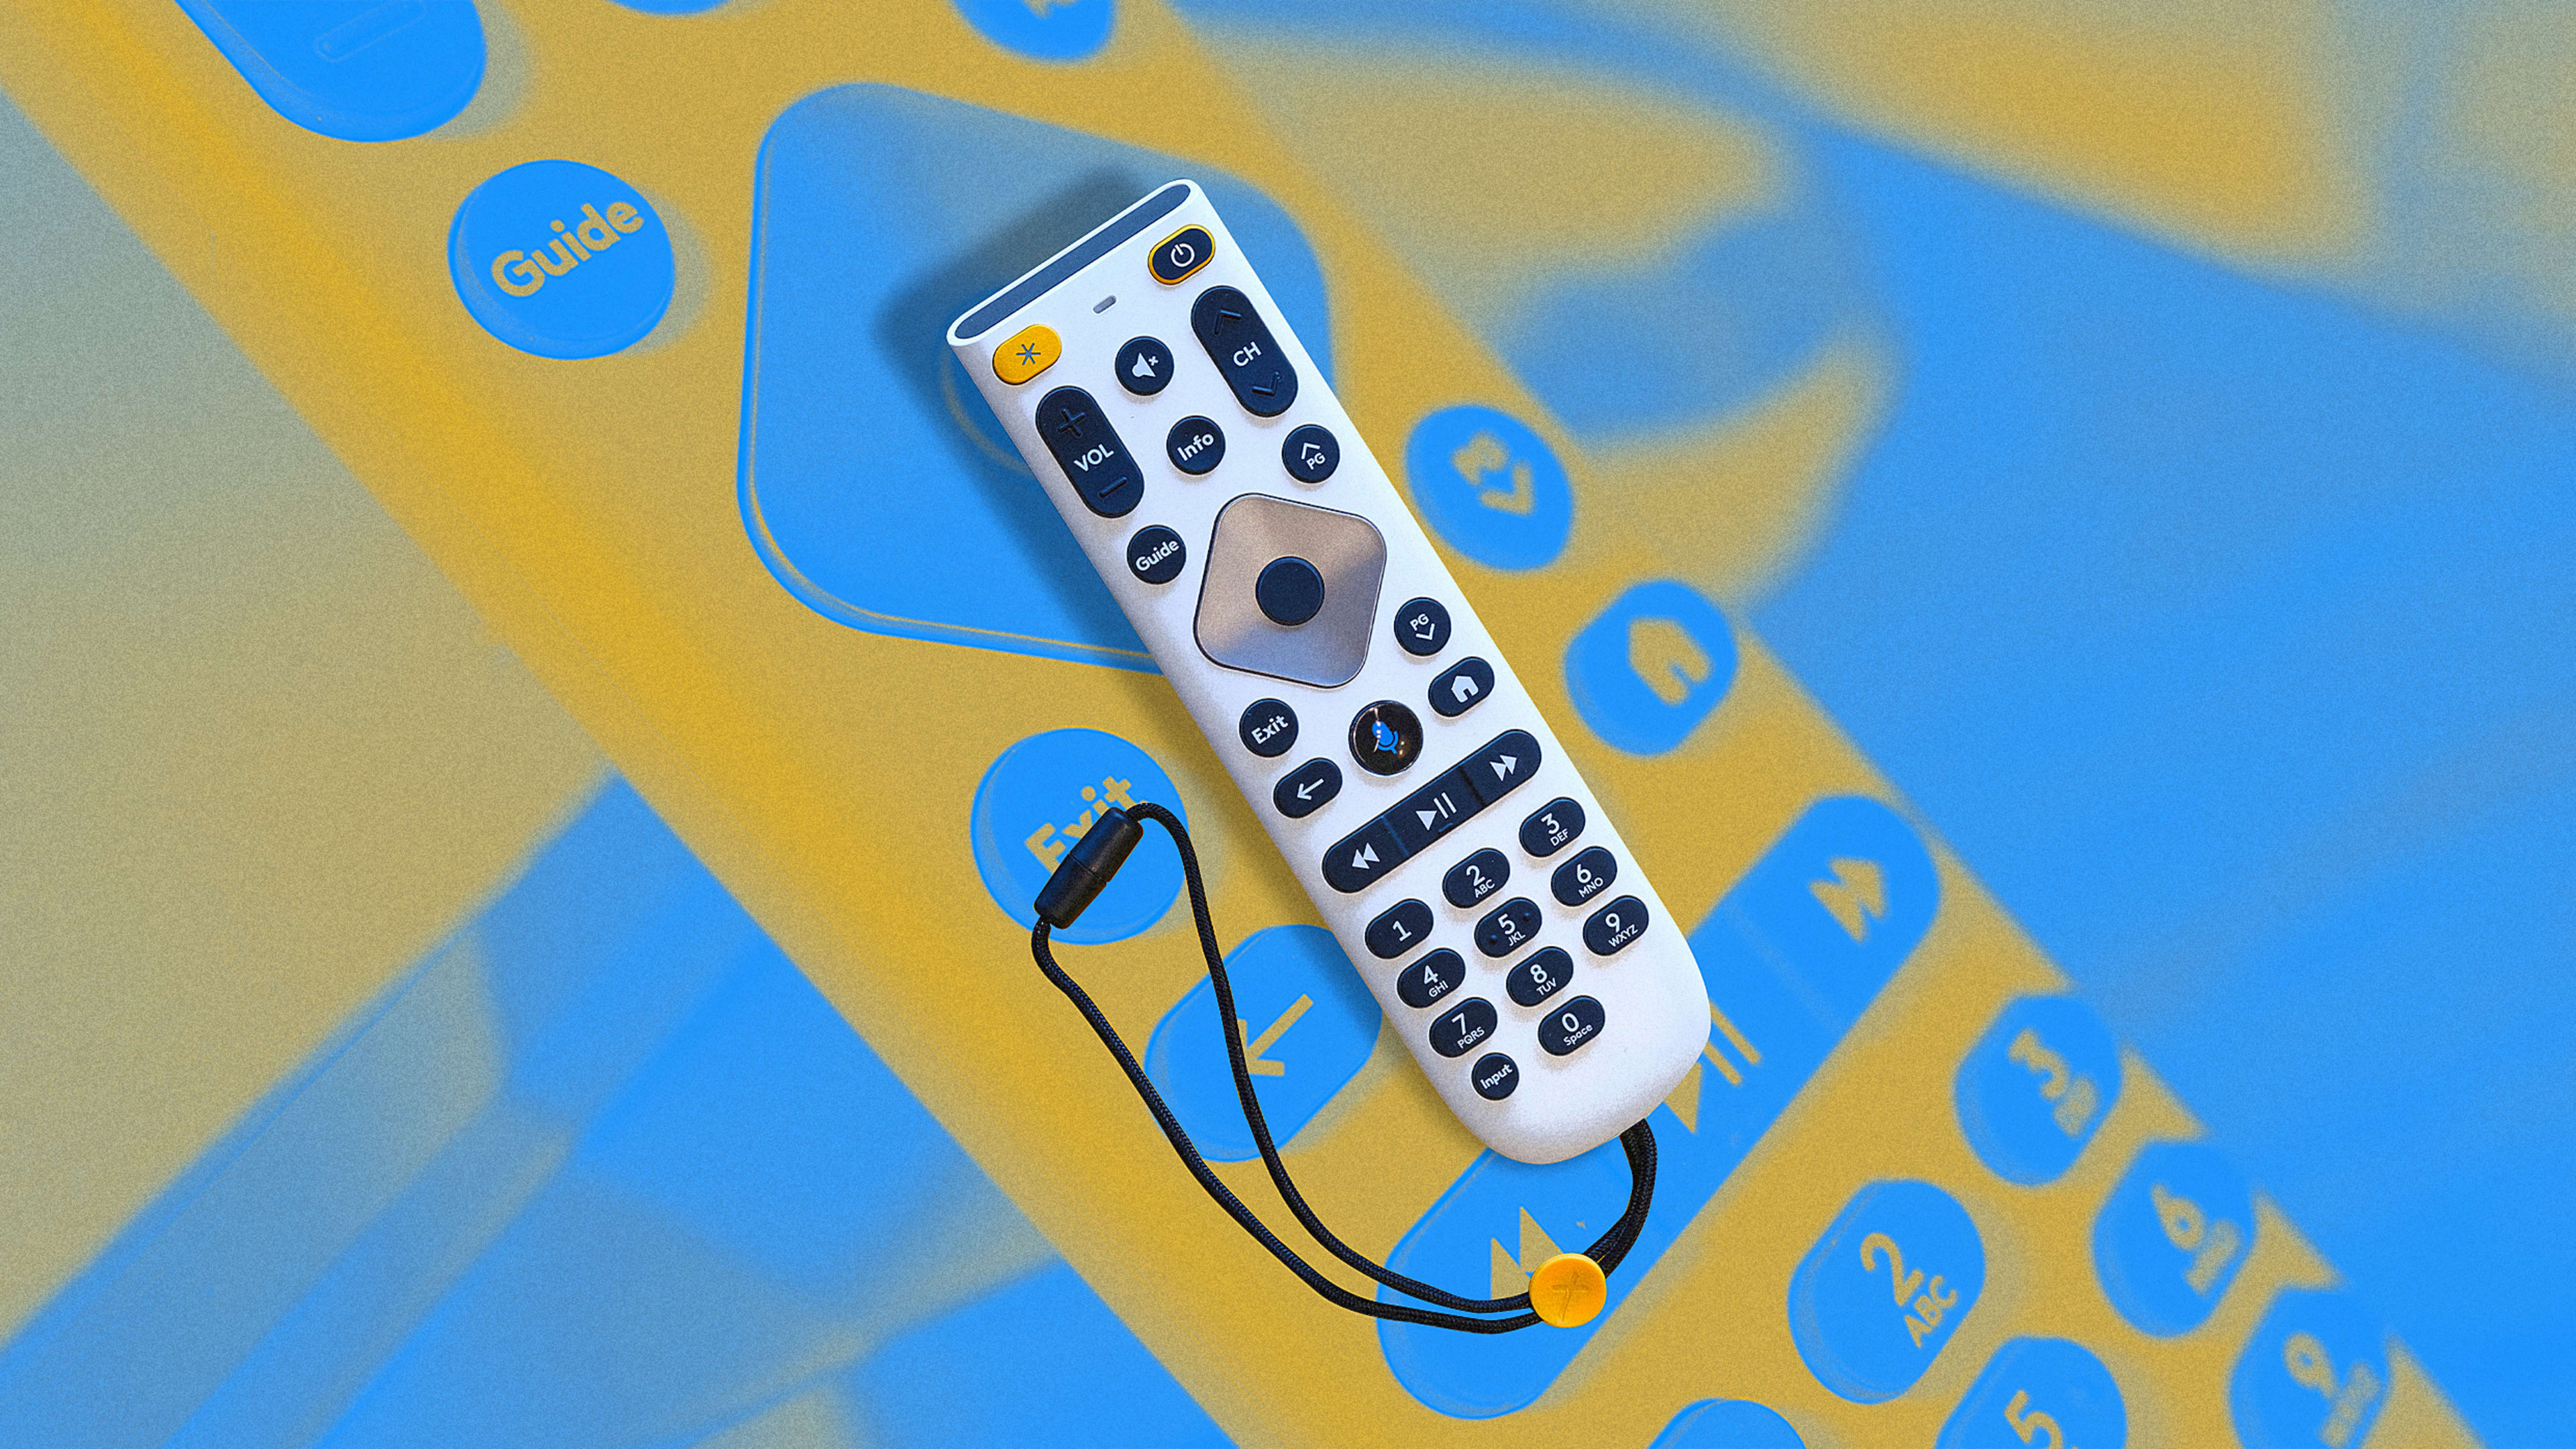 Comcast’s new remote control was designed for—and with—disabled users